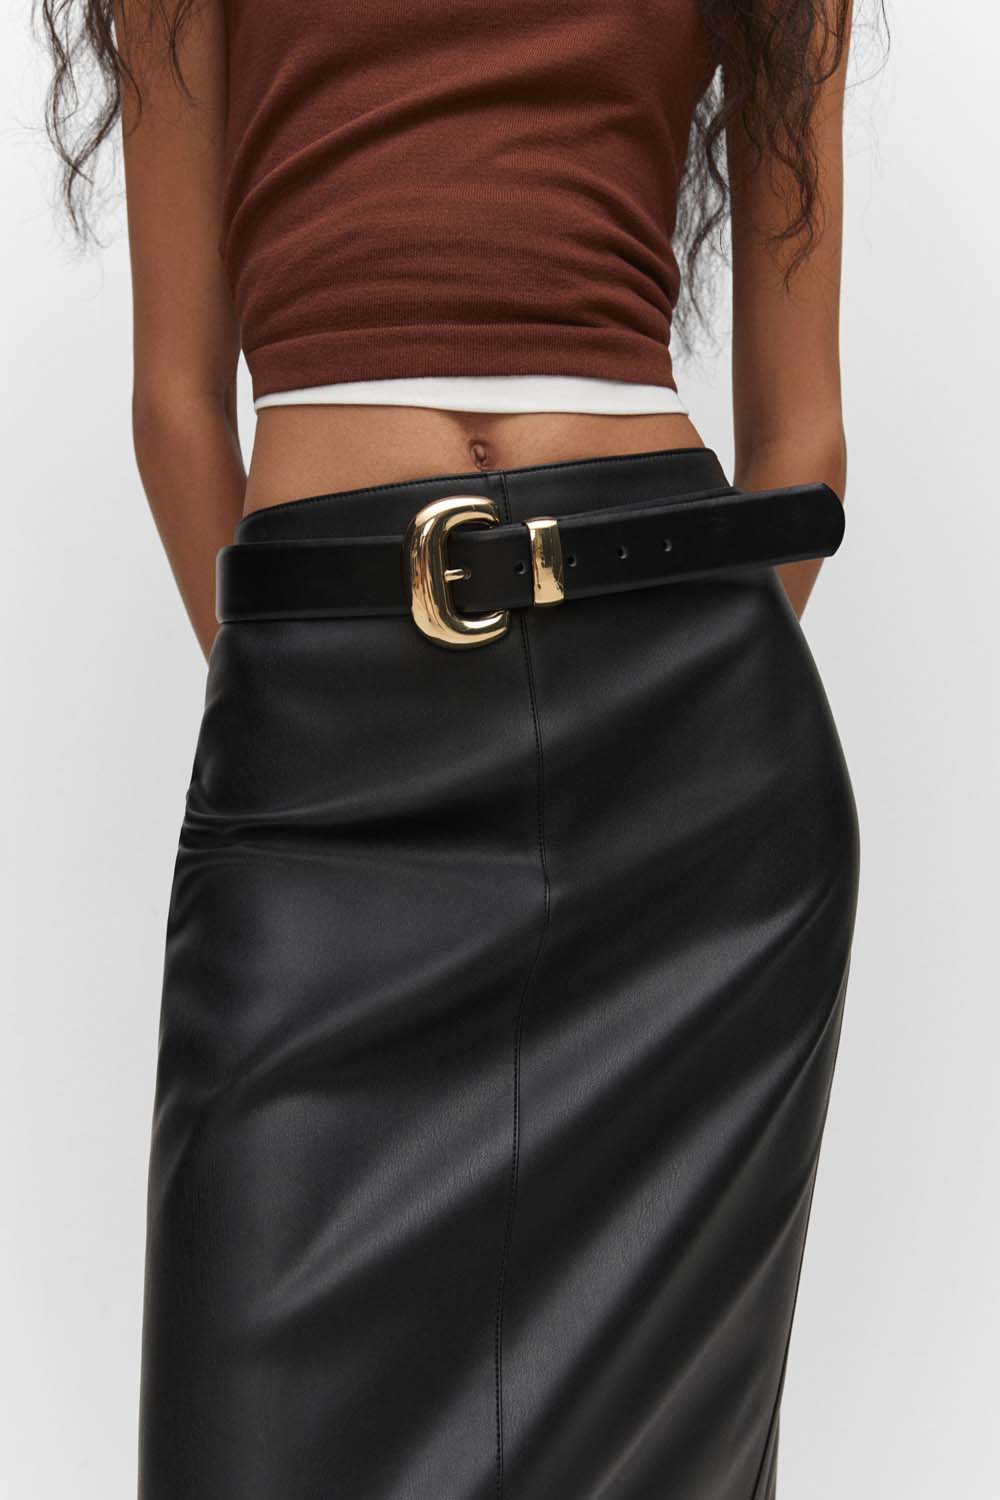 Faux-leather pencil skirt